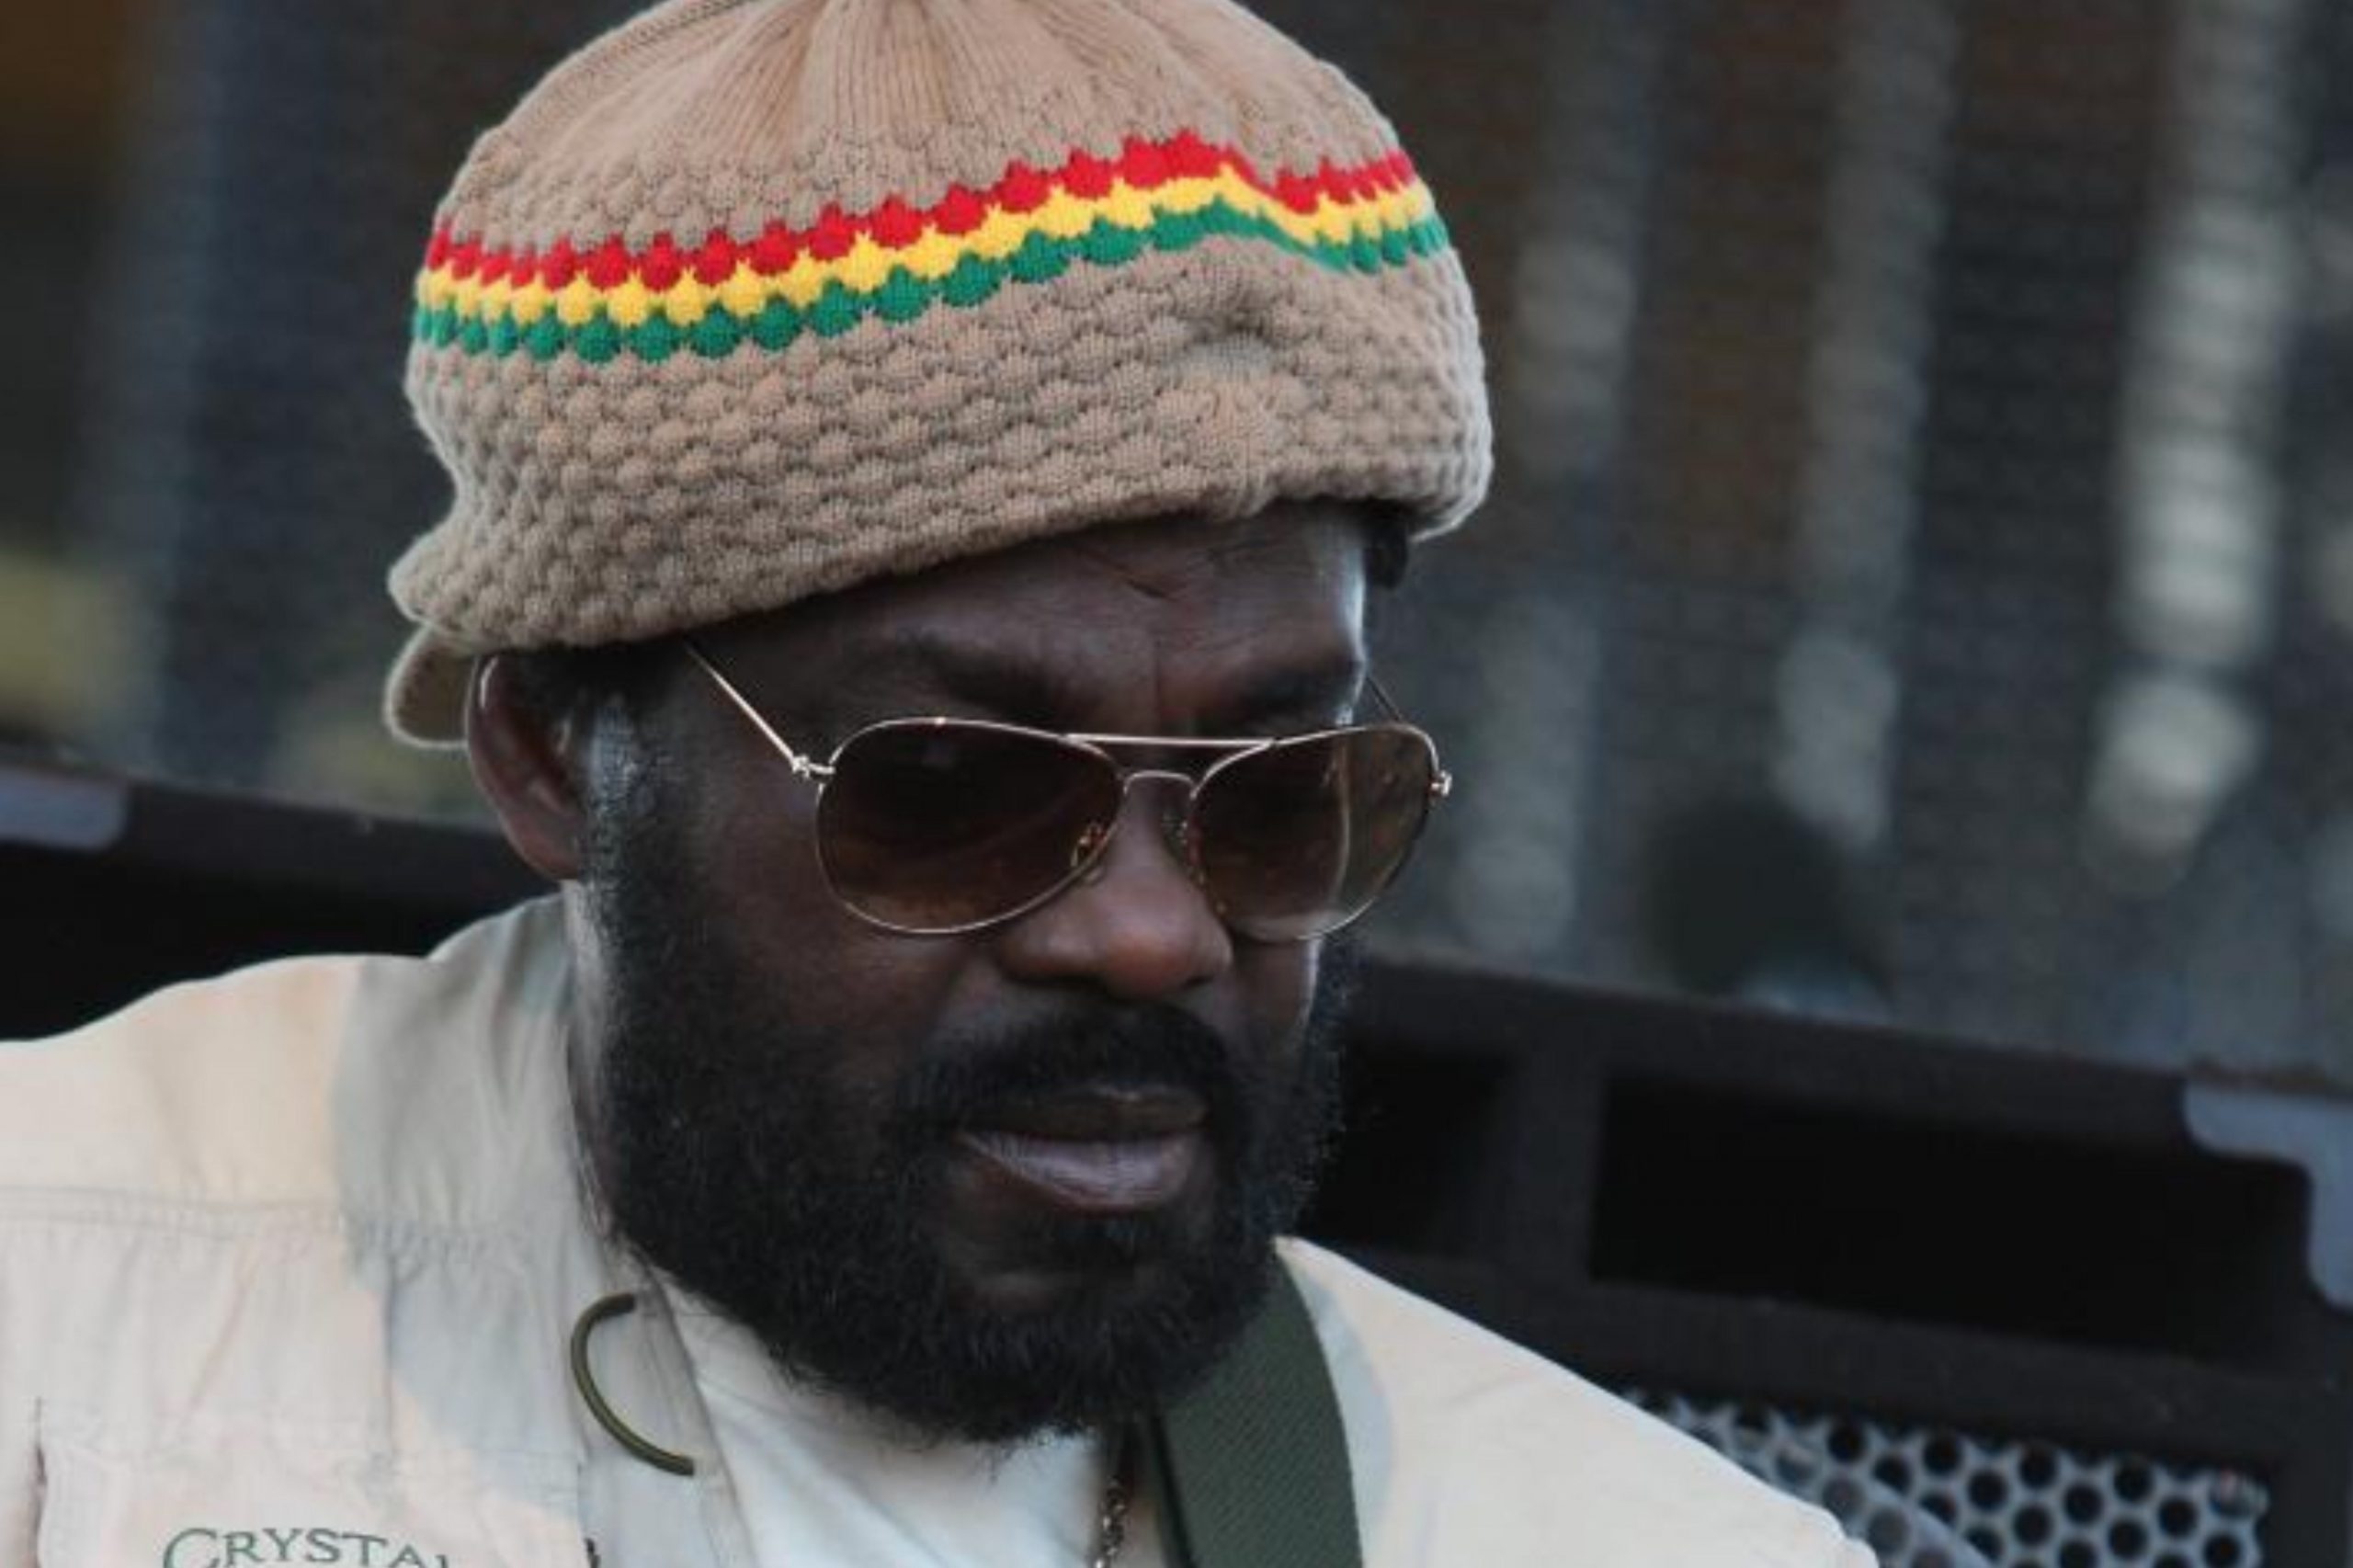 Bob Marley &amp; The Wailers bassist Aston &#8220;Familyman&#8221; Barrett has died after a &#8220;long battle&#8221; with illness., Magnate Daily